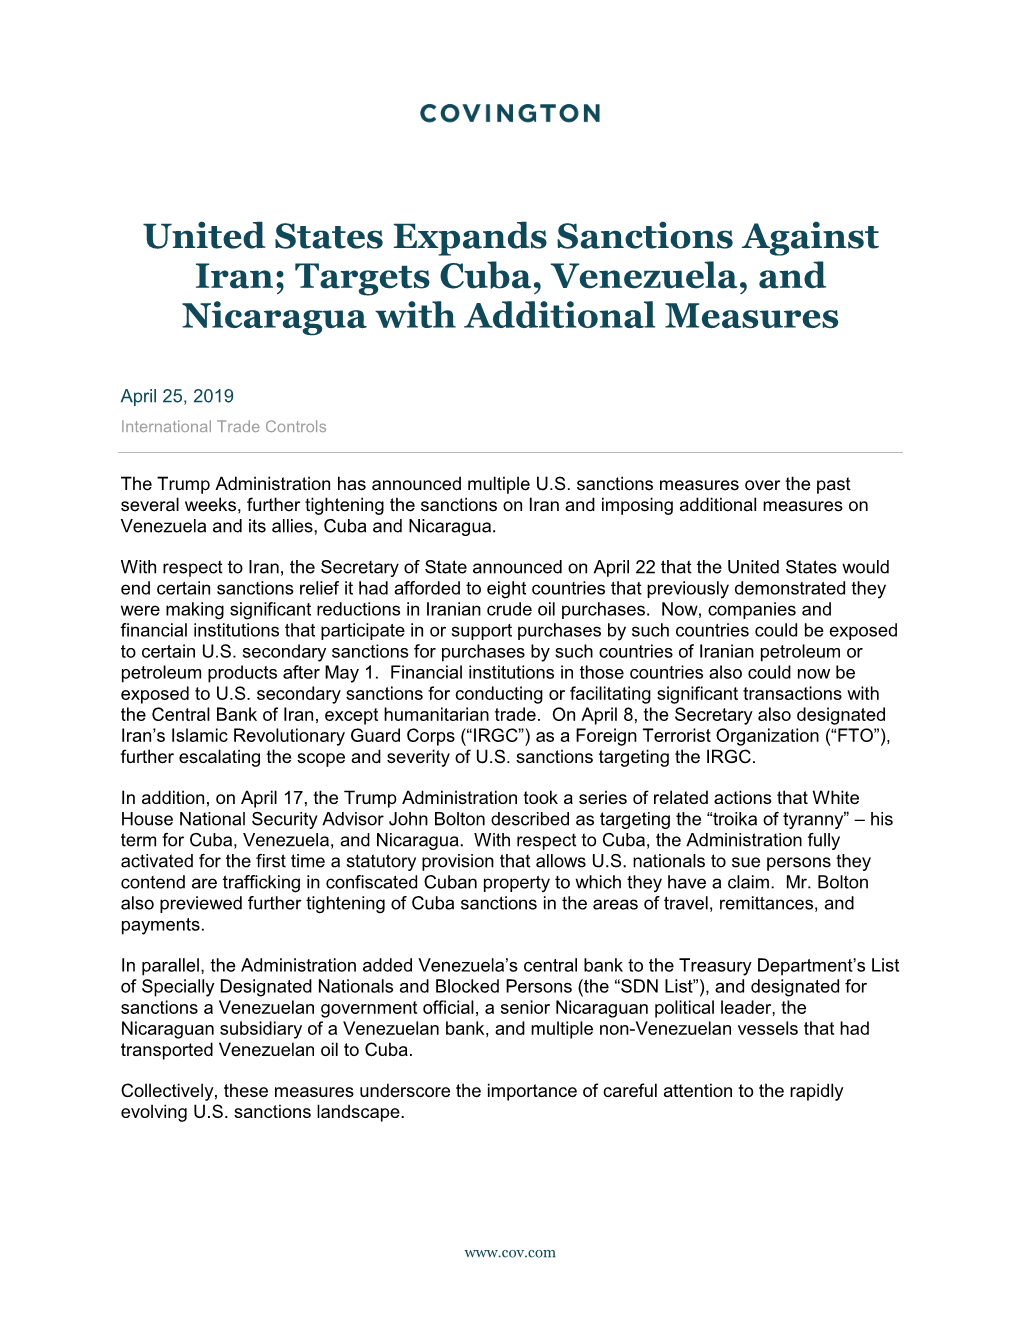 United States Expands Sanctions Against Iran; Targets Cuba, Venezuela, and Nicaragua with Additional Measures